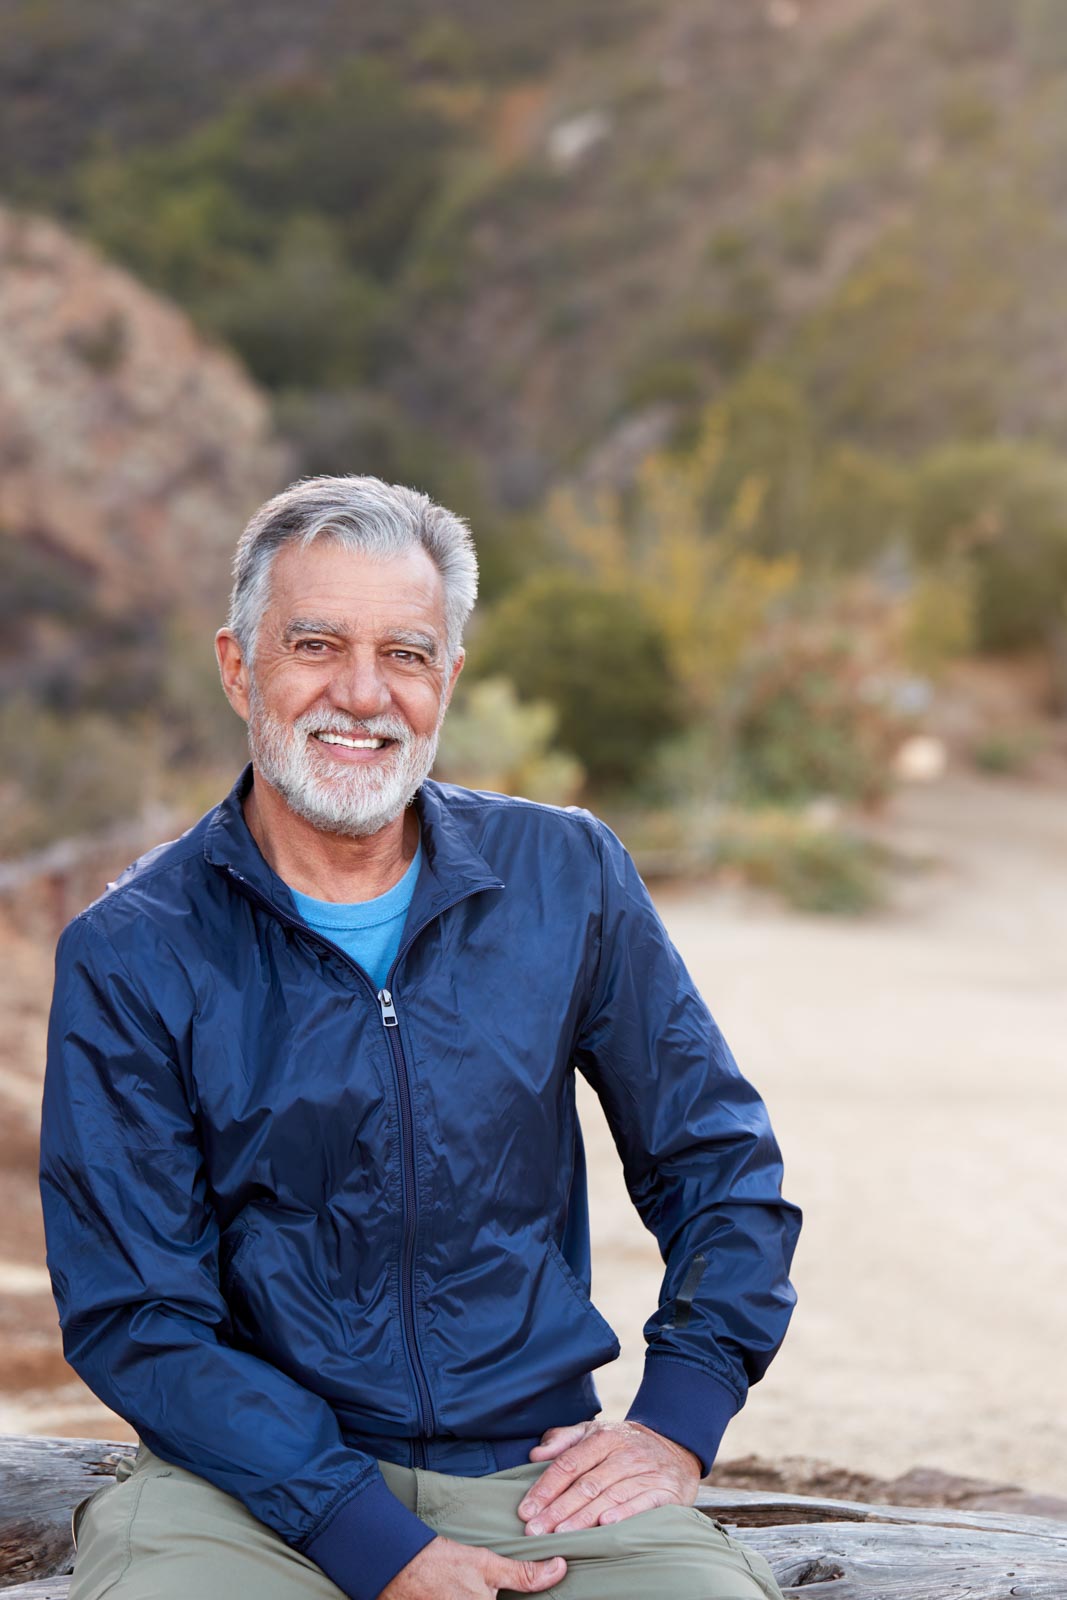 Pain-free and smiling: A senior man from Los Angeles finds relief from chronic pain at the California Sports and Spine Center in Culver City.